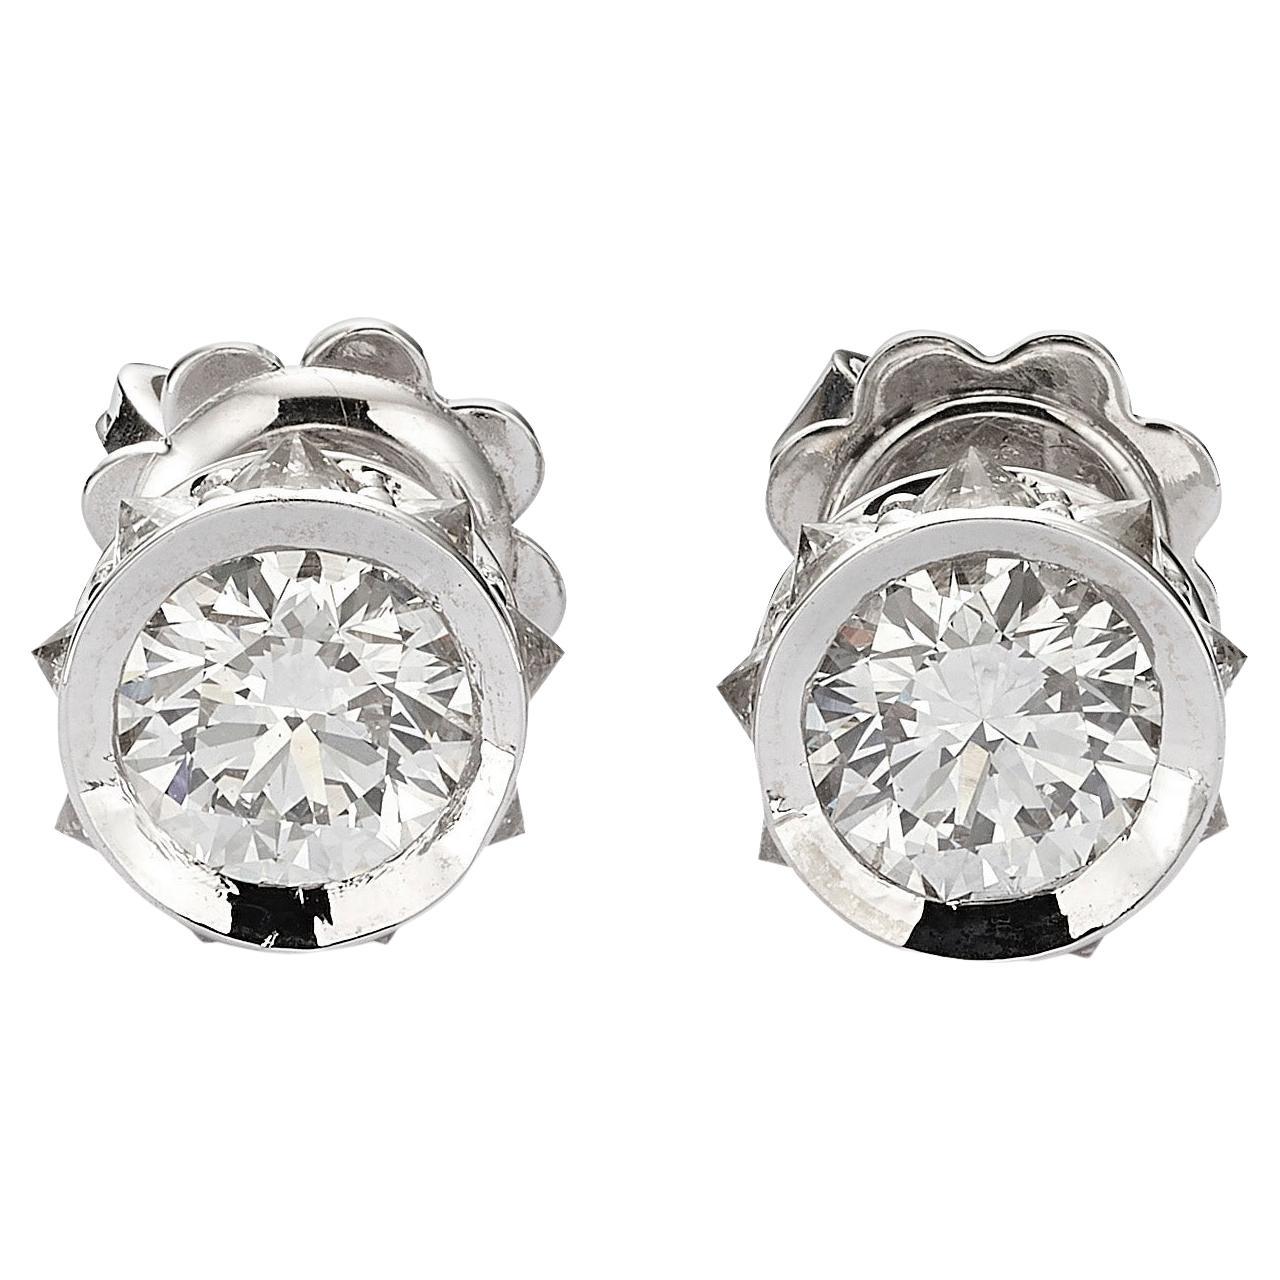 Dazzling 18k White Gold Zenith Diamond Earrings with 0.70ct GIA Certified Stones